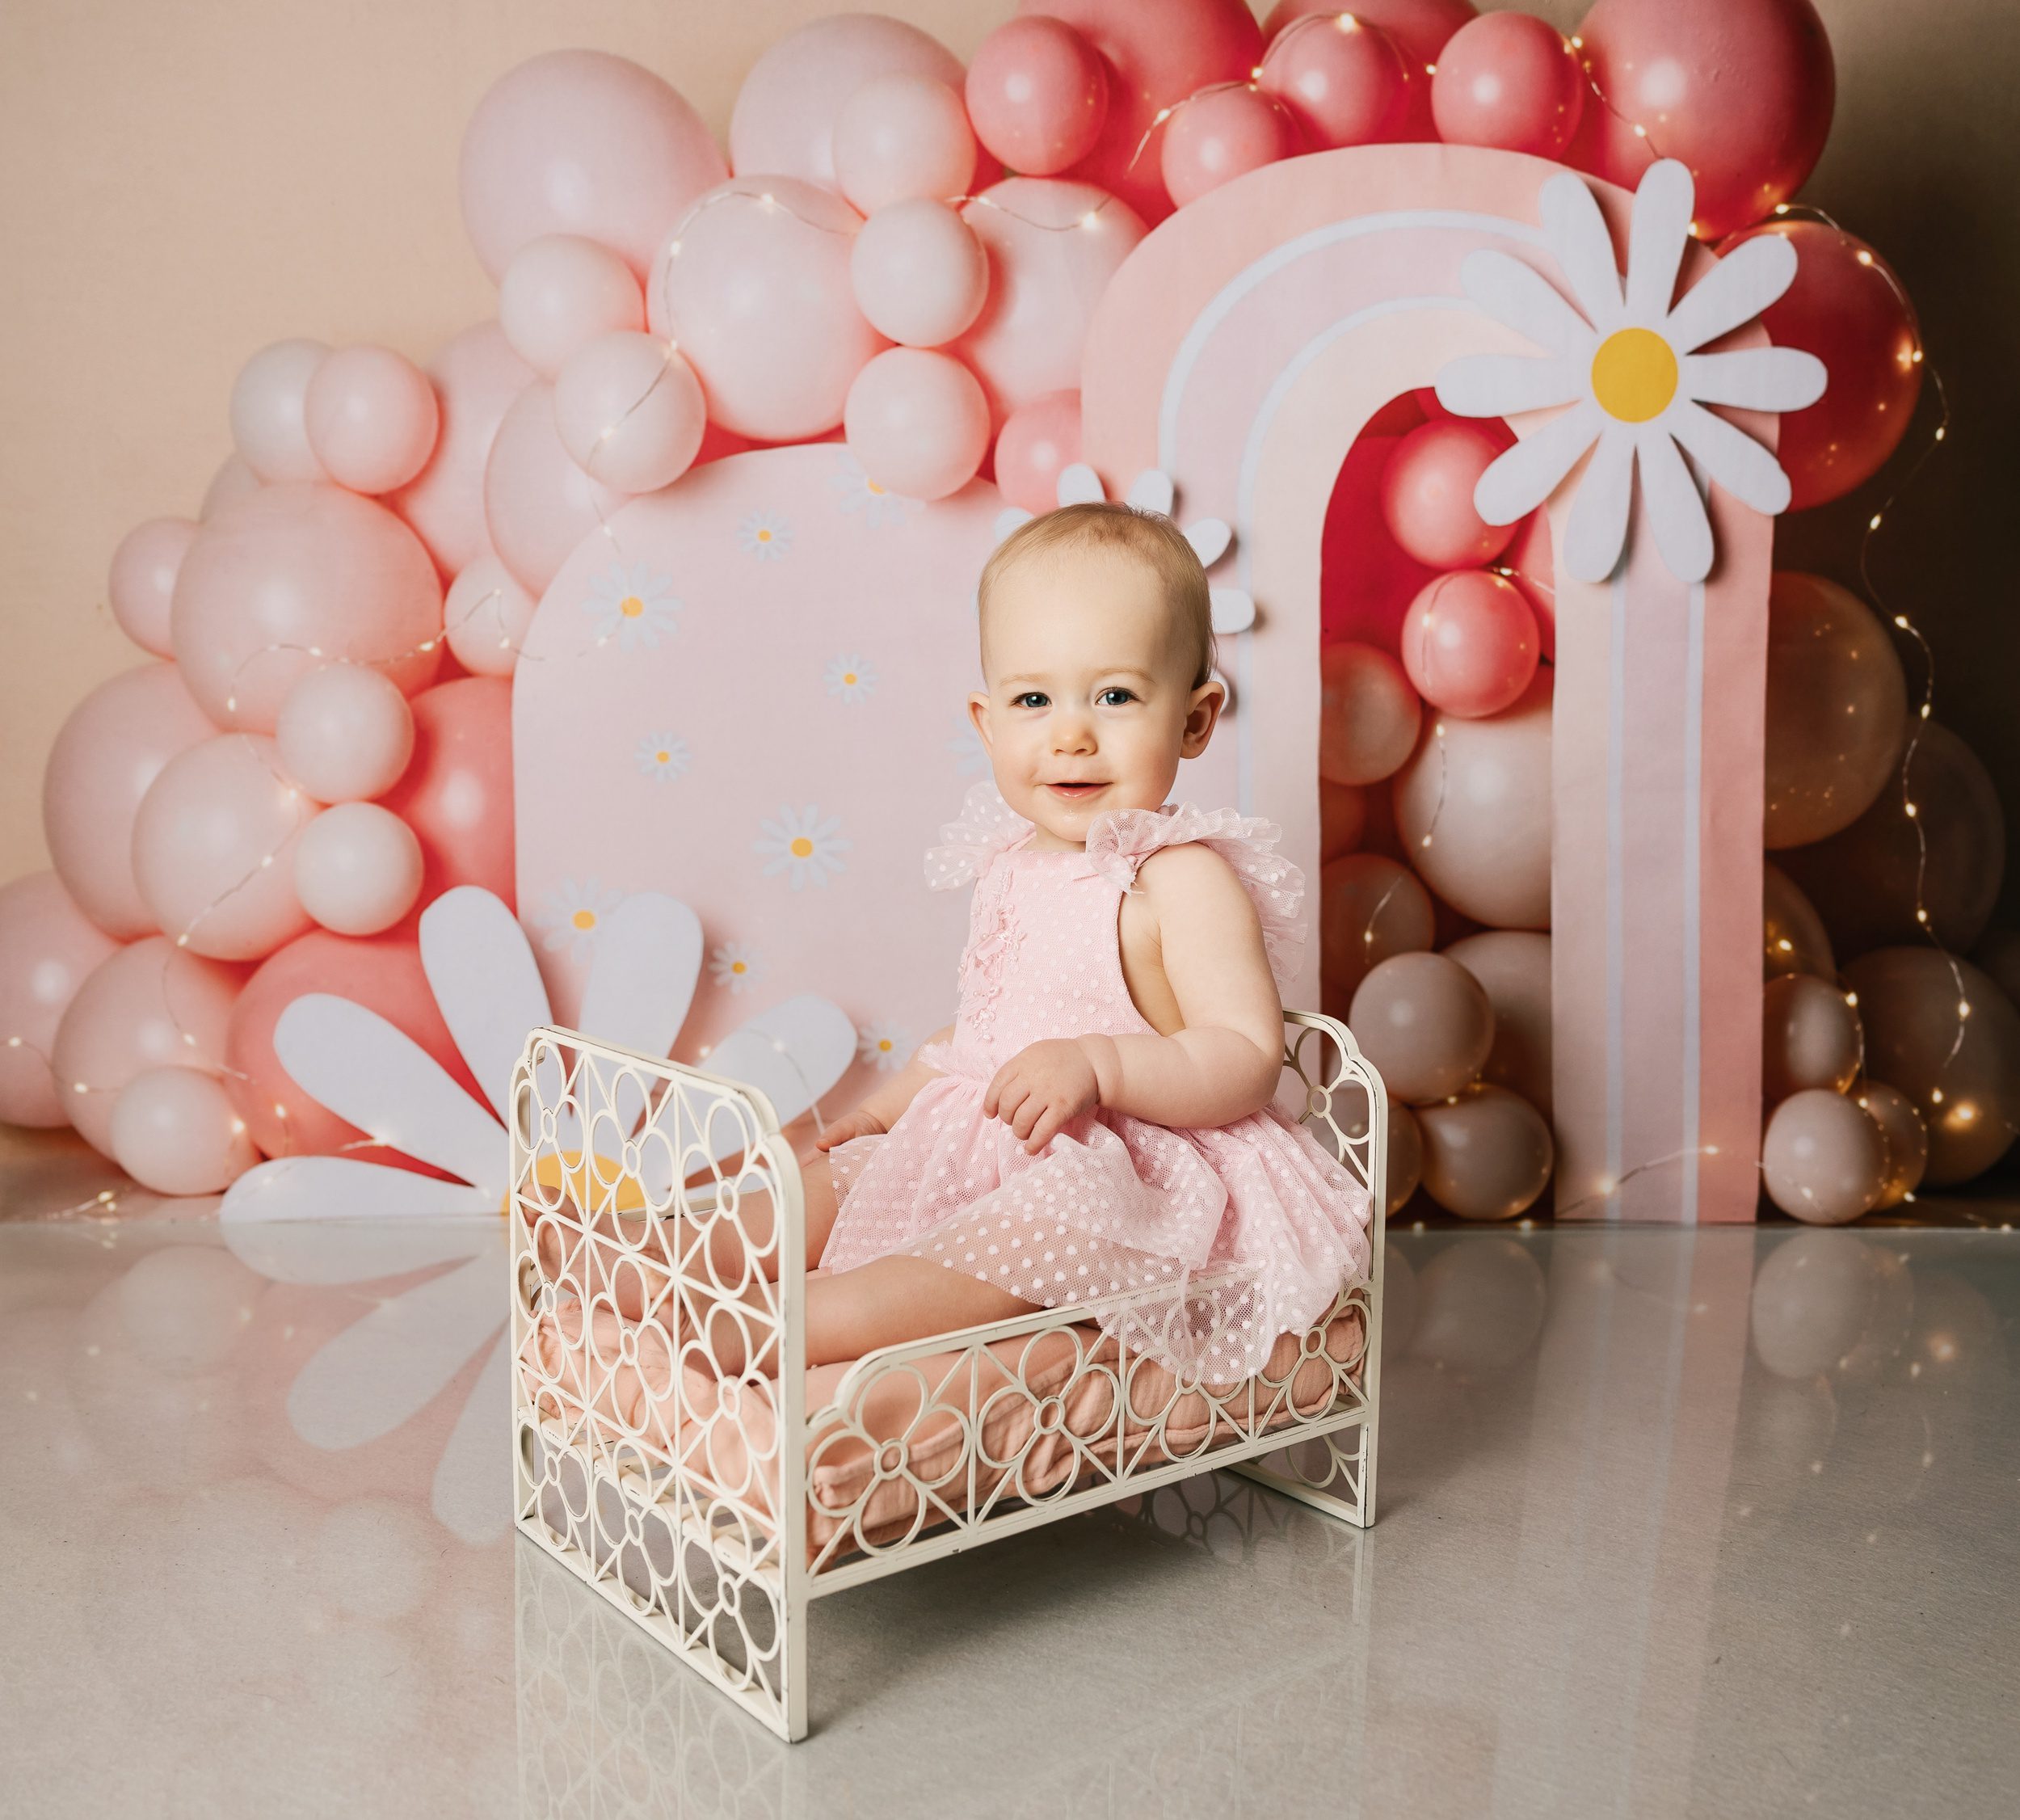 A happy toddler in a pink dress sits in a small metal bed in front of a balloon wall